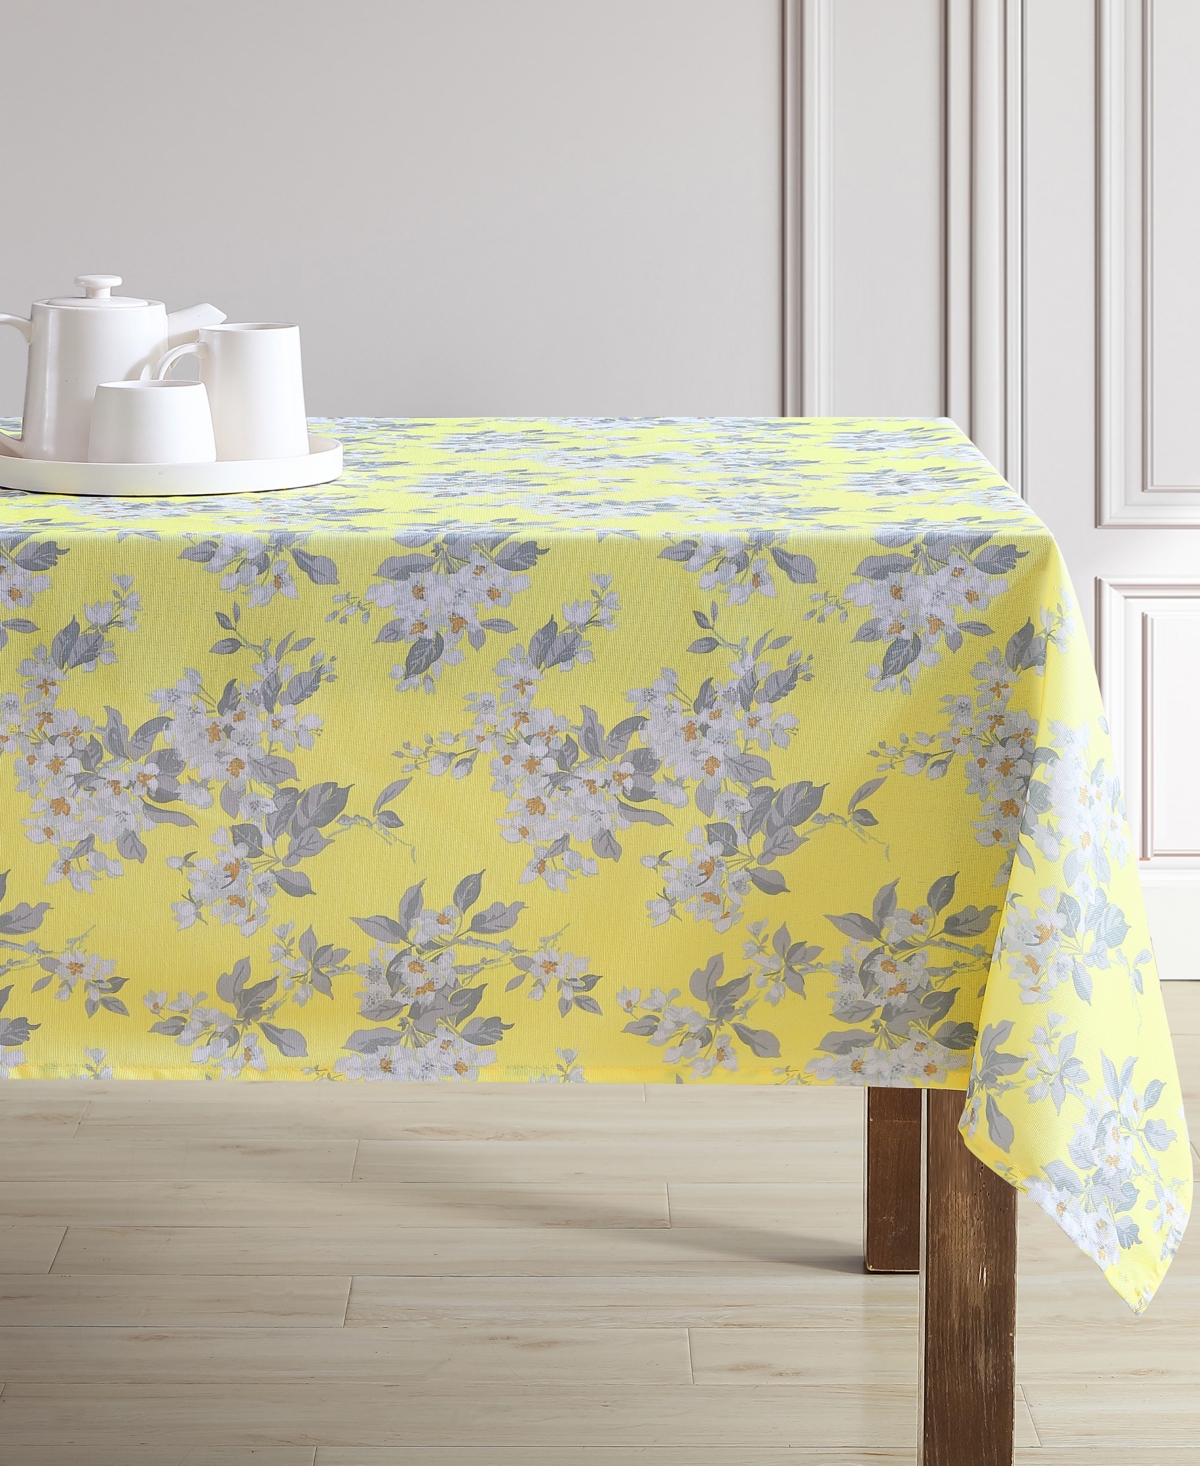 Laura Ashley Easy Care Tablecloth, 60" X 102", Service For 6 In Apple Blossom